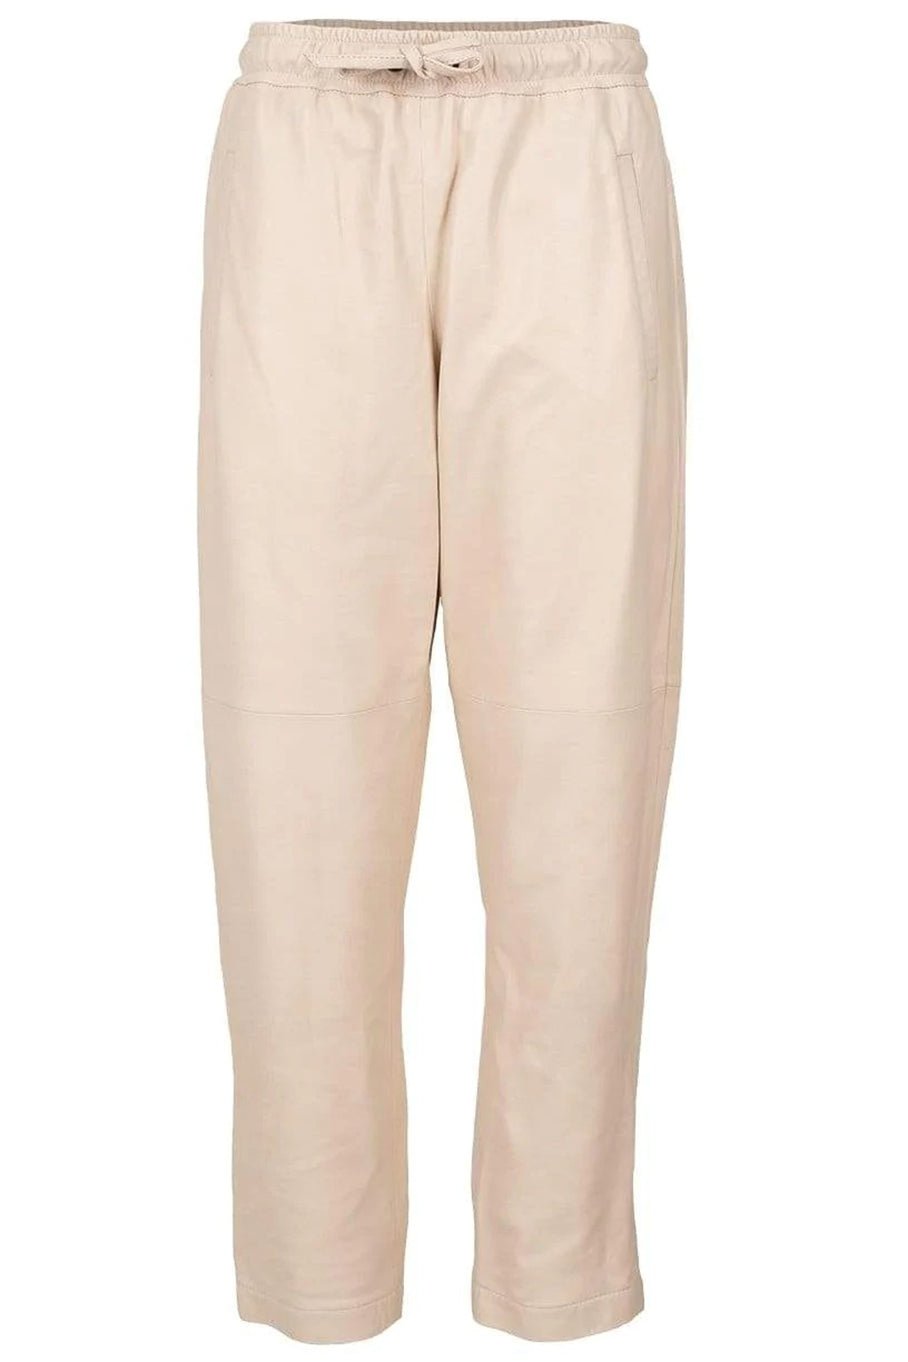 BRUNELLO CUCINELLI-Leather Pull On Jogger-